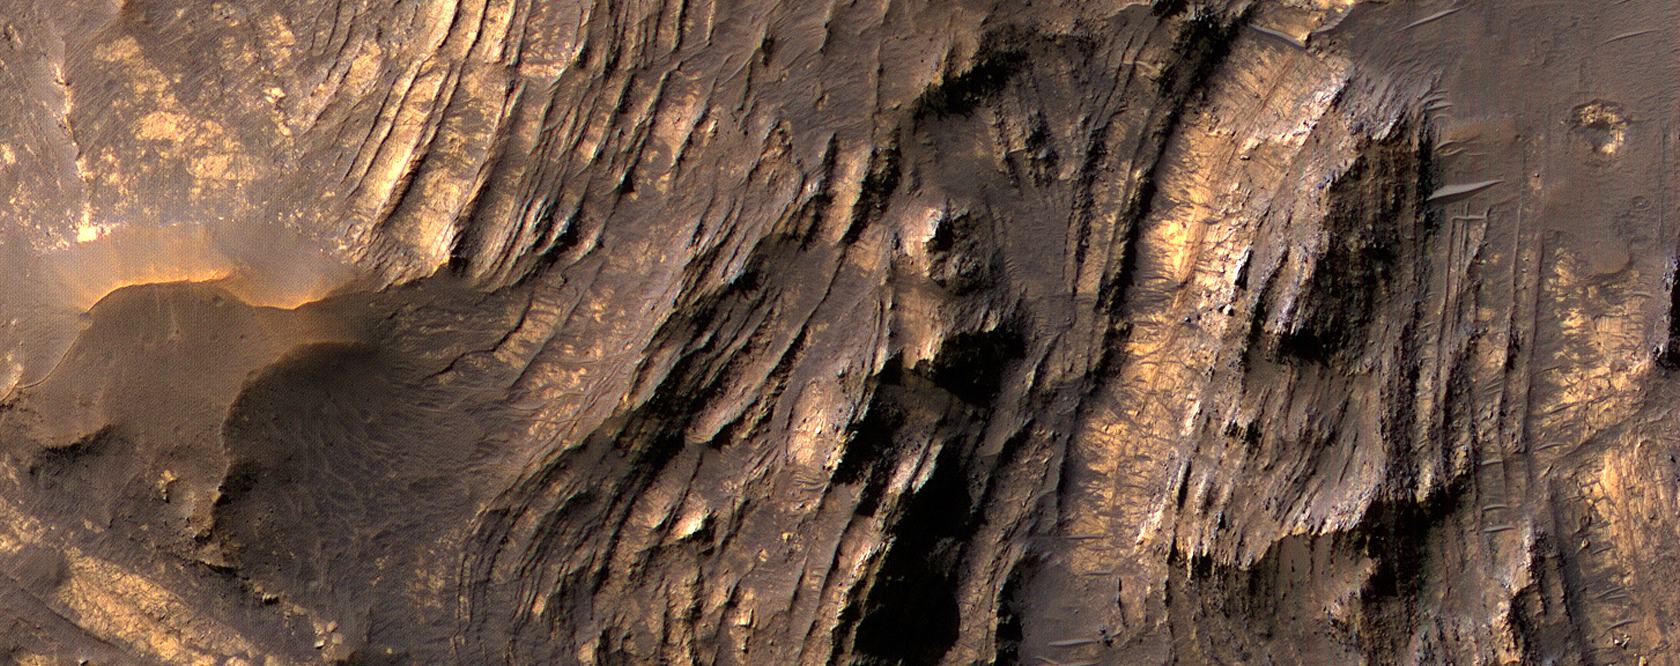 Layered Bedrock in the Central Uplift of Betio Crater